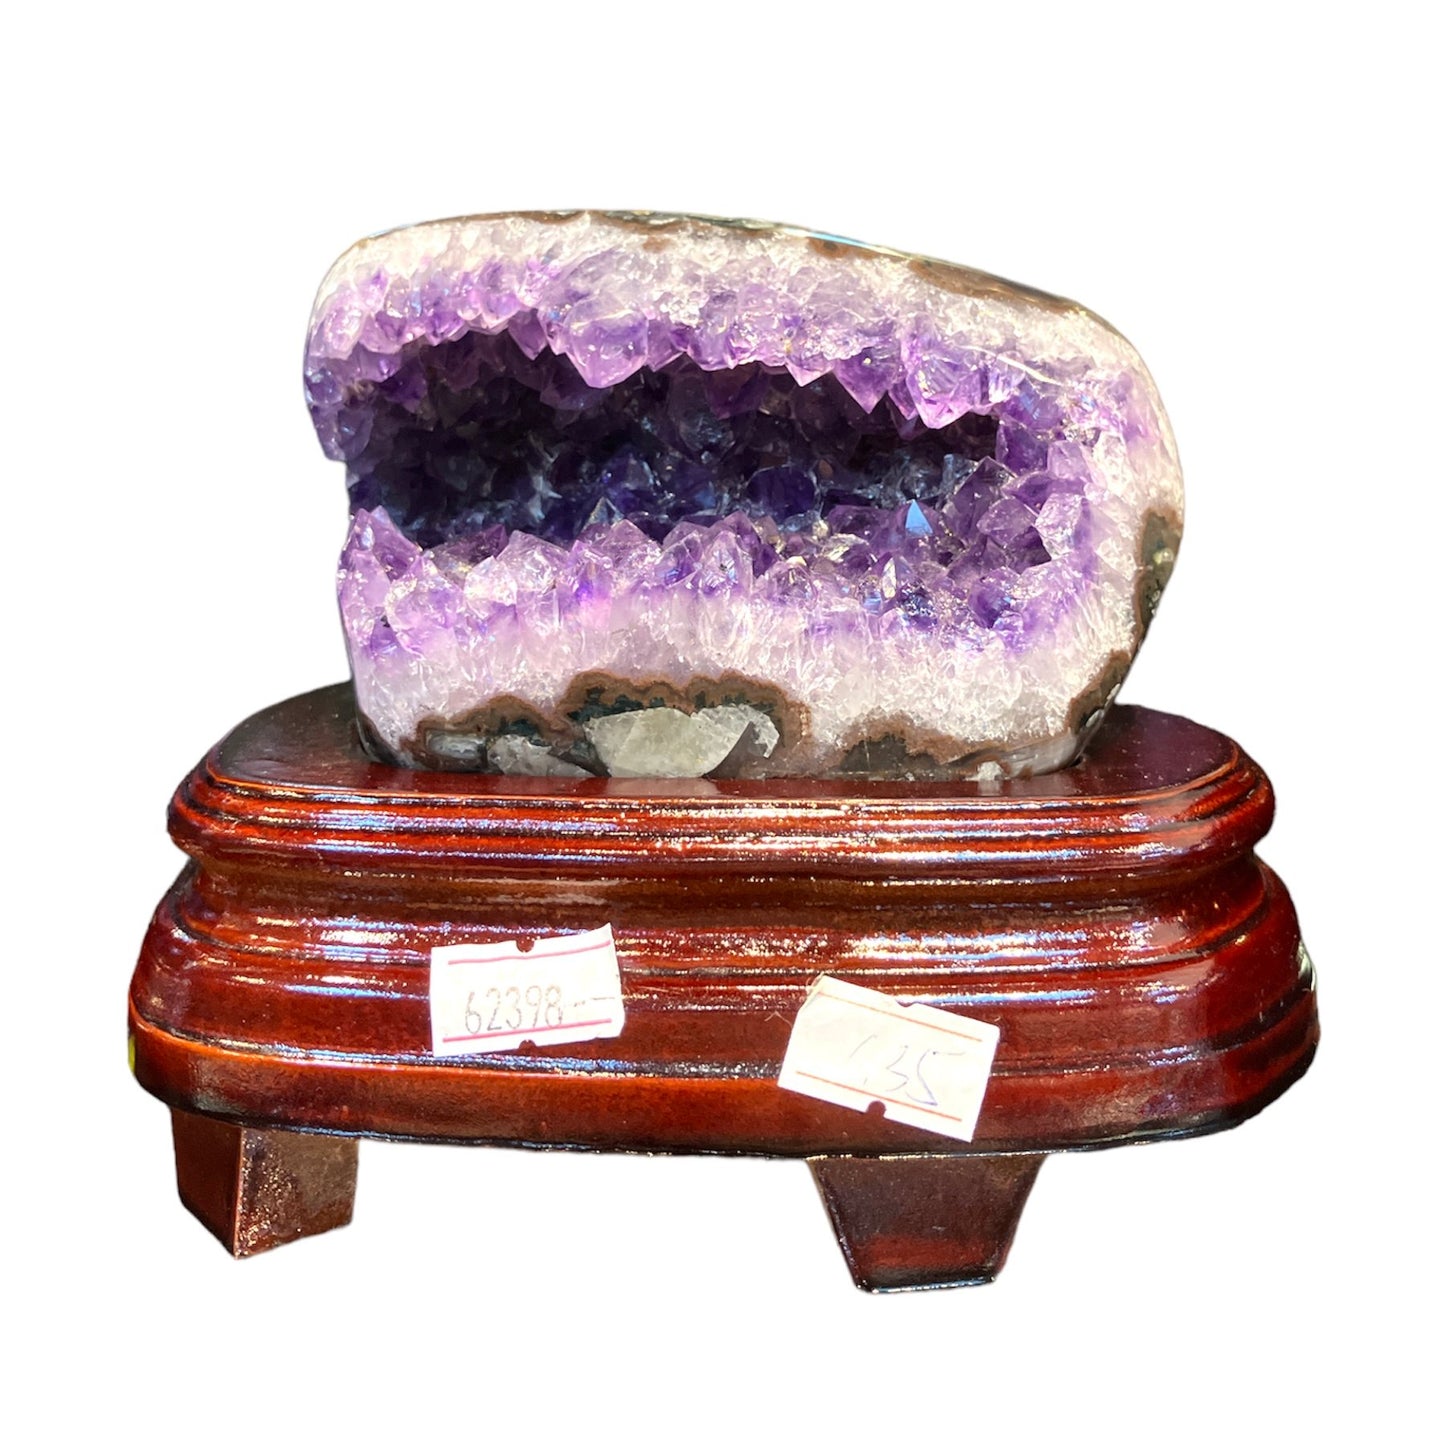 *RARE AGATE SHELL* 1371g Natural Uruguay Amethyst Geode Fengshui Display with Wooden Base